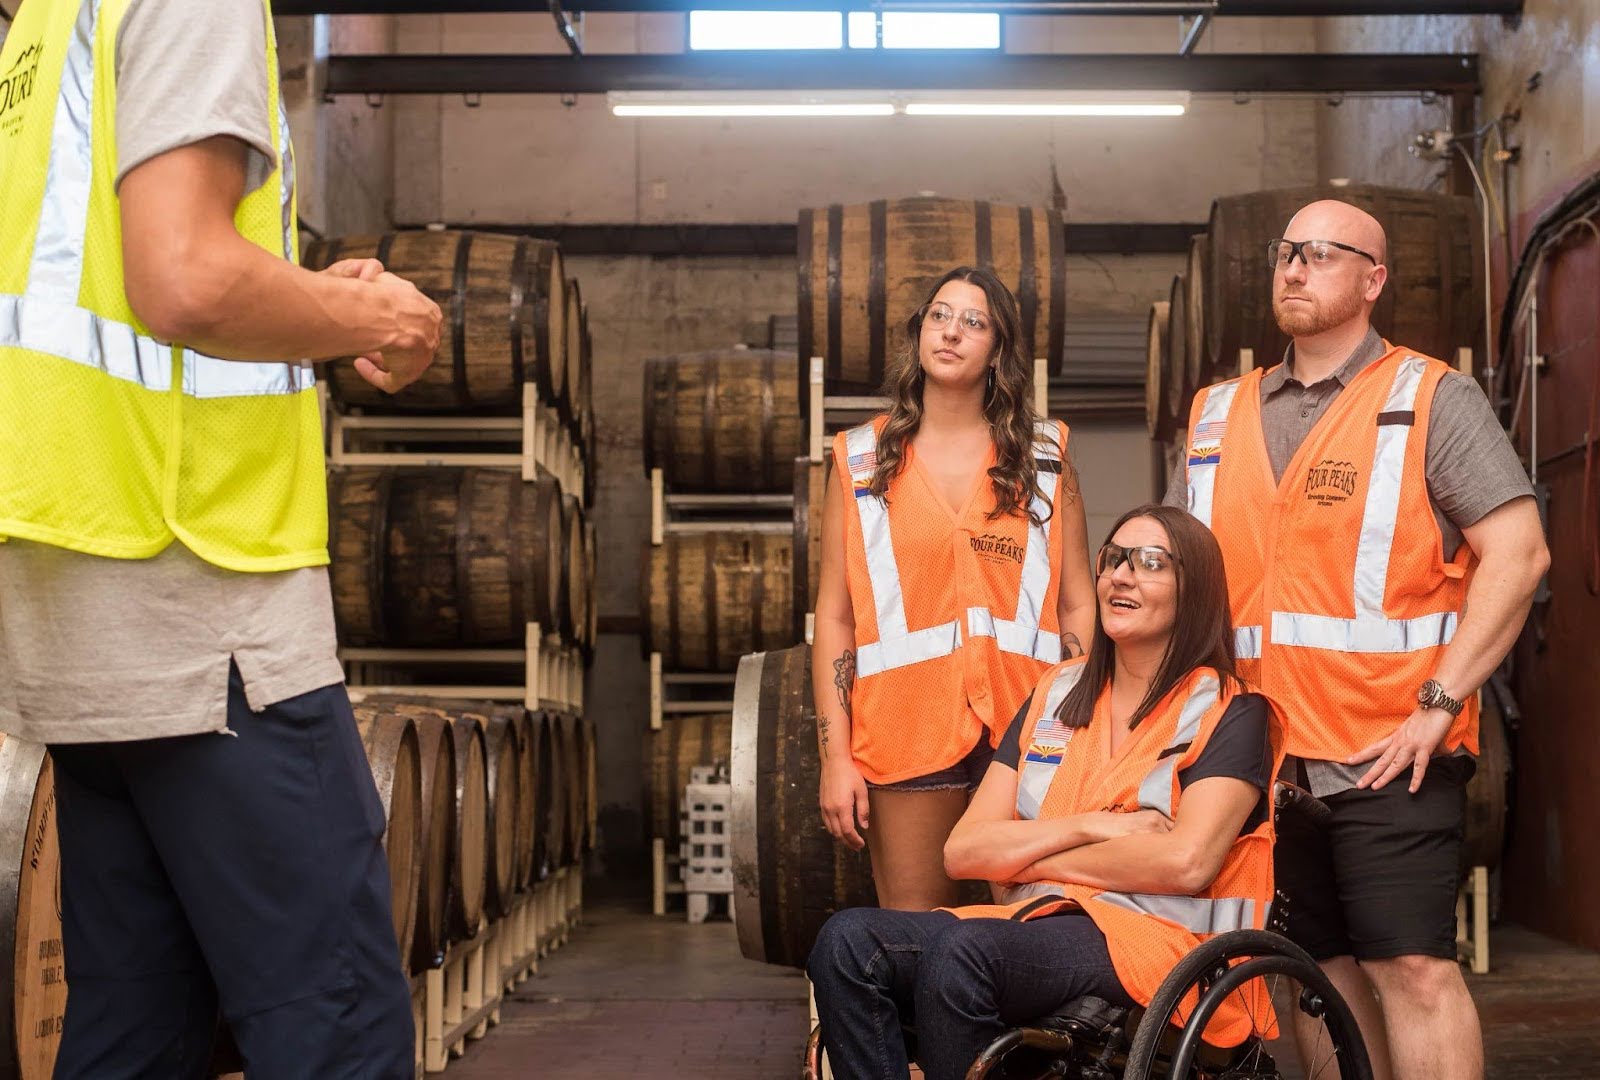 Three people, one in a wheelchair, sit and listen to a supervisor wearing safety goggles and orange reflective vests.